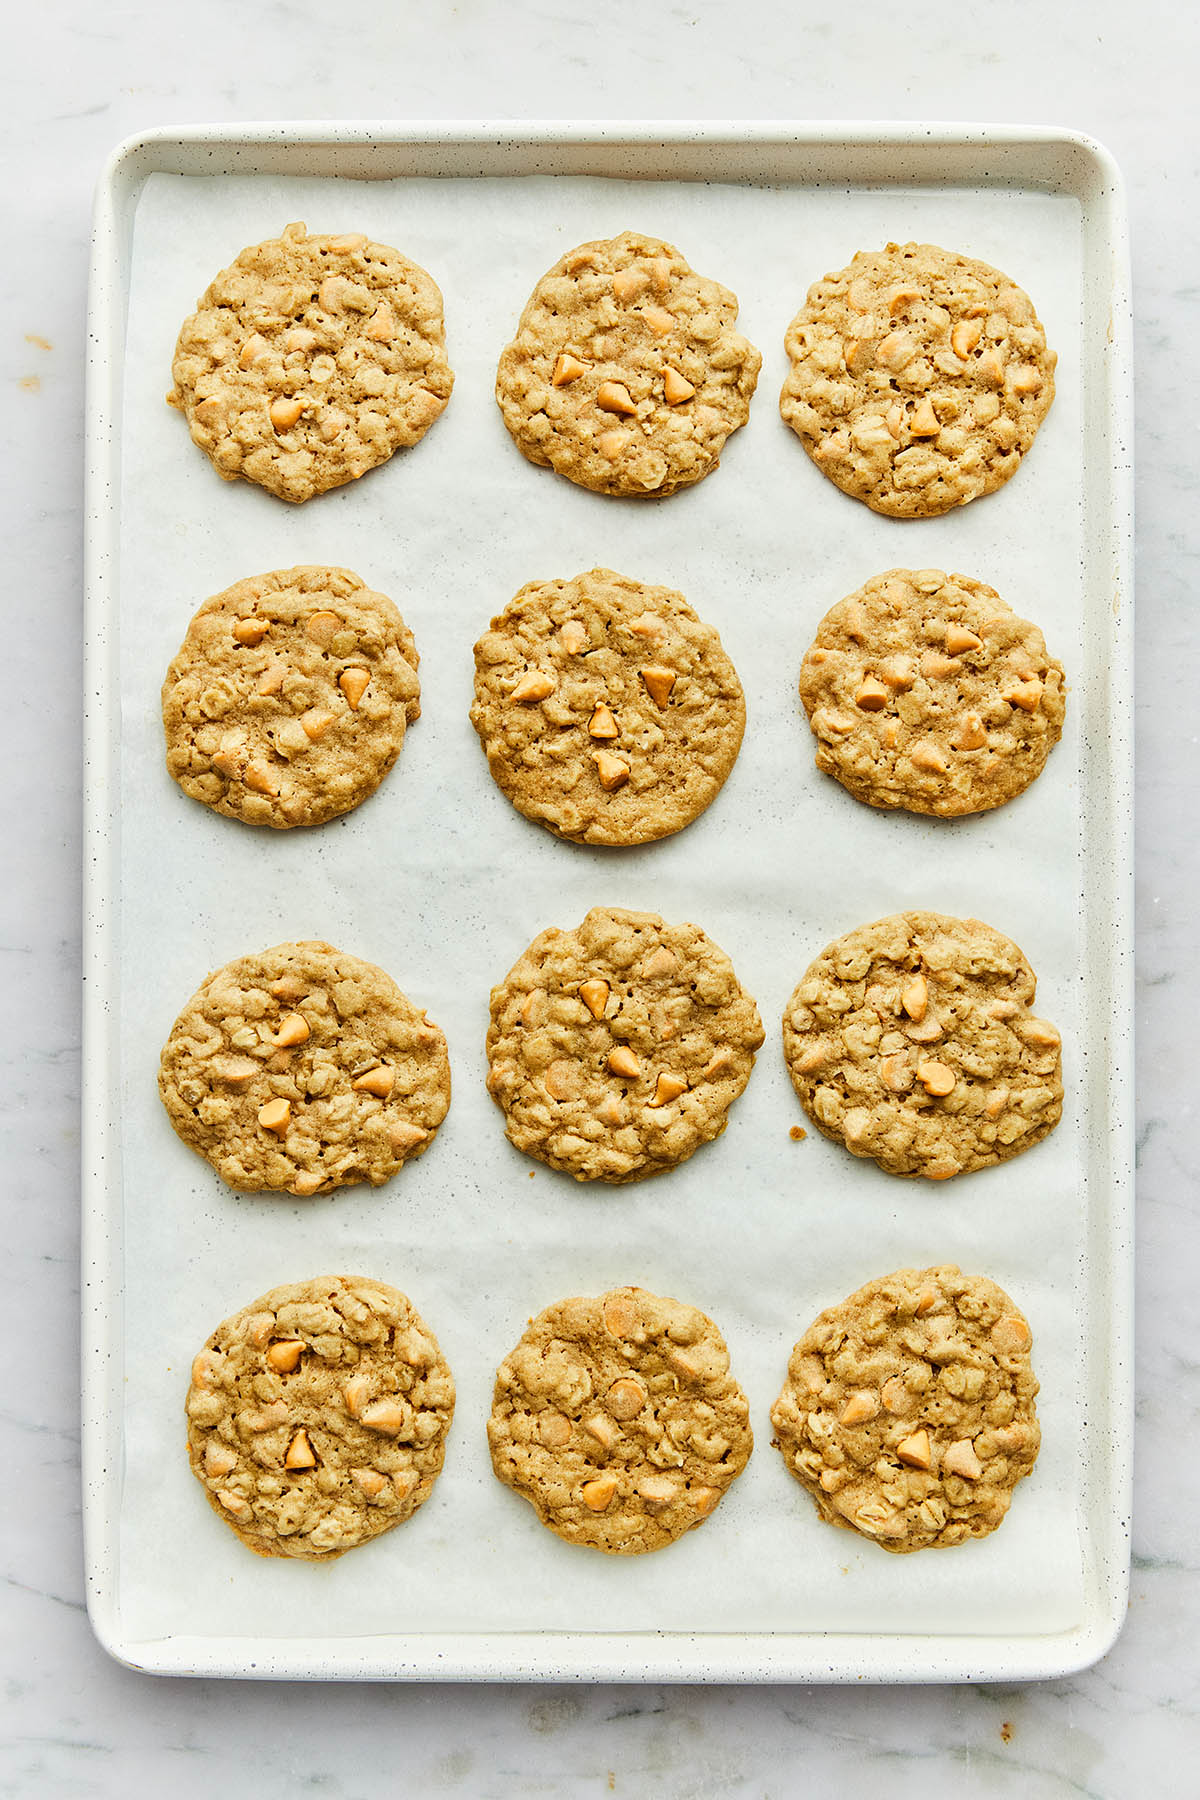 A pan of oatmeal scotchies.